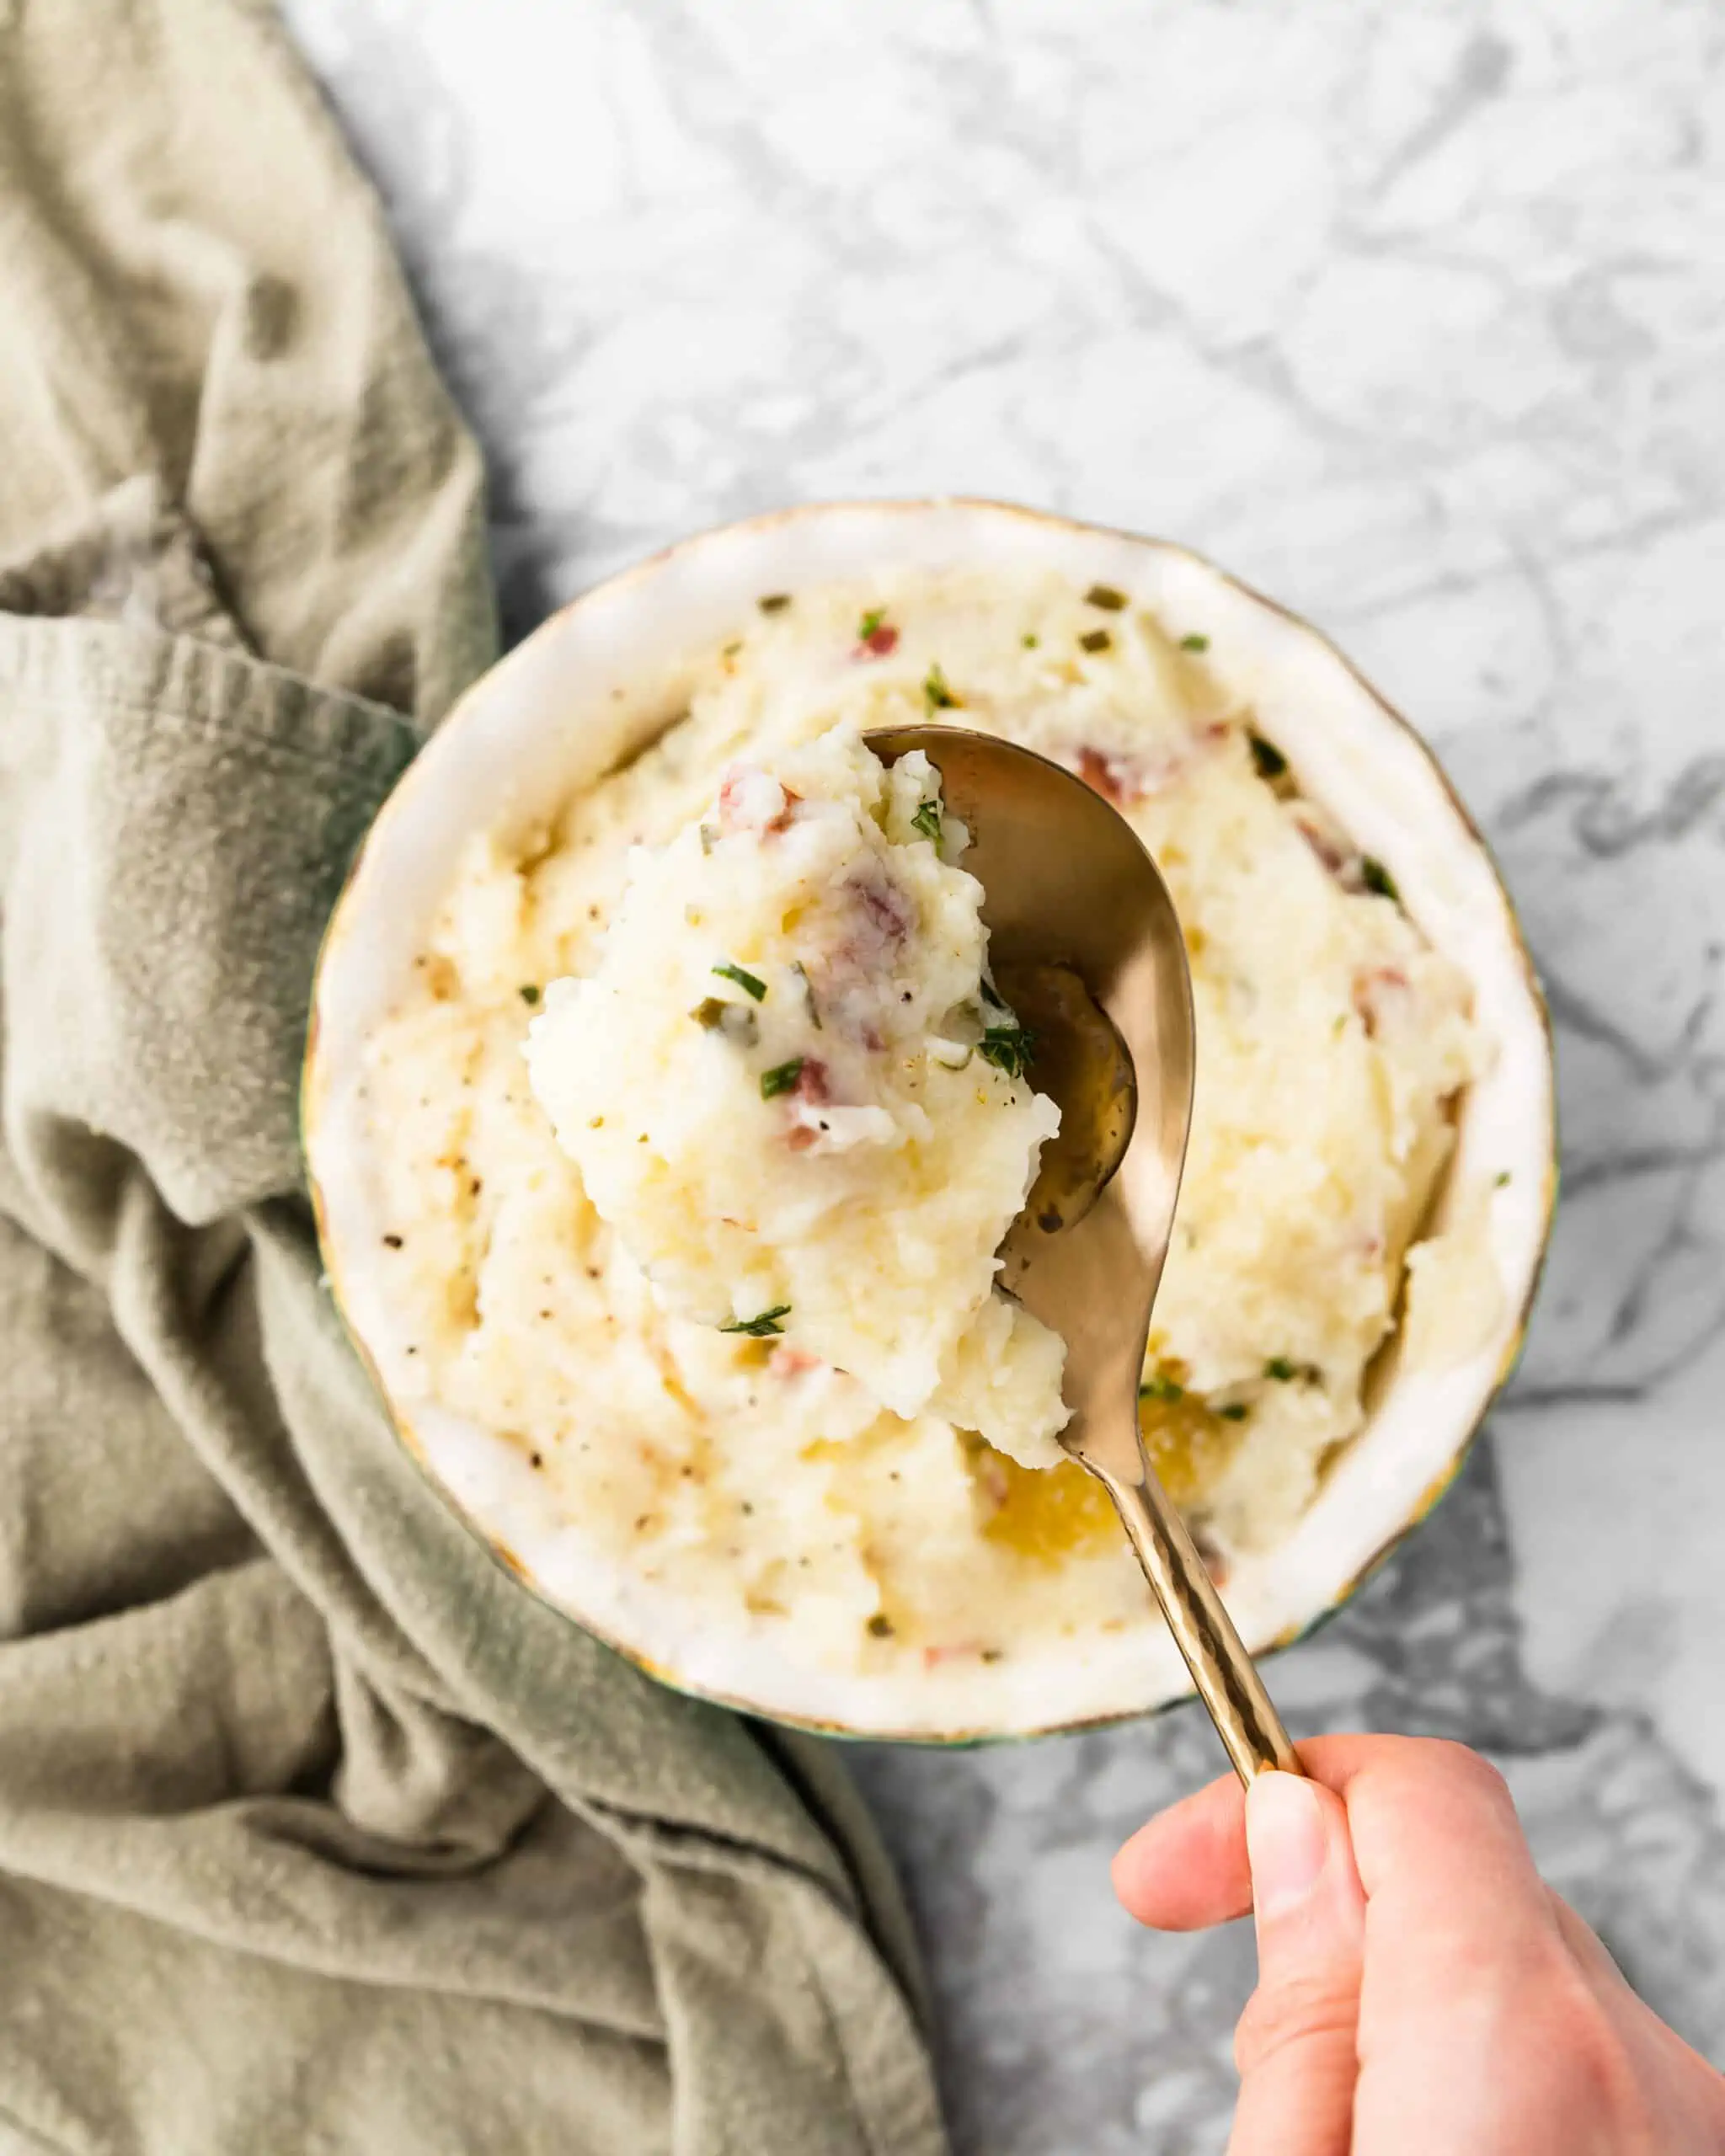 spooning mashed potatoes with rosemary.